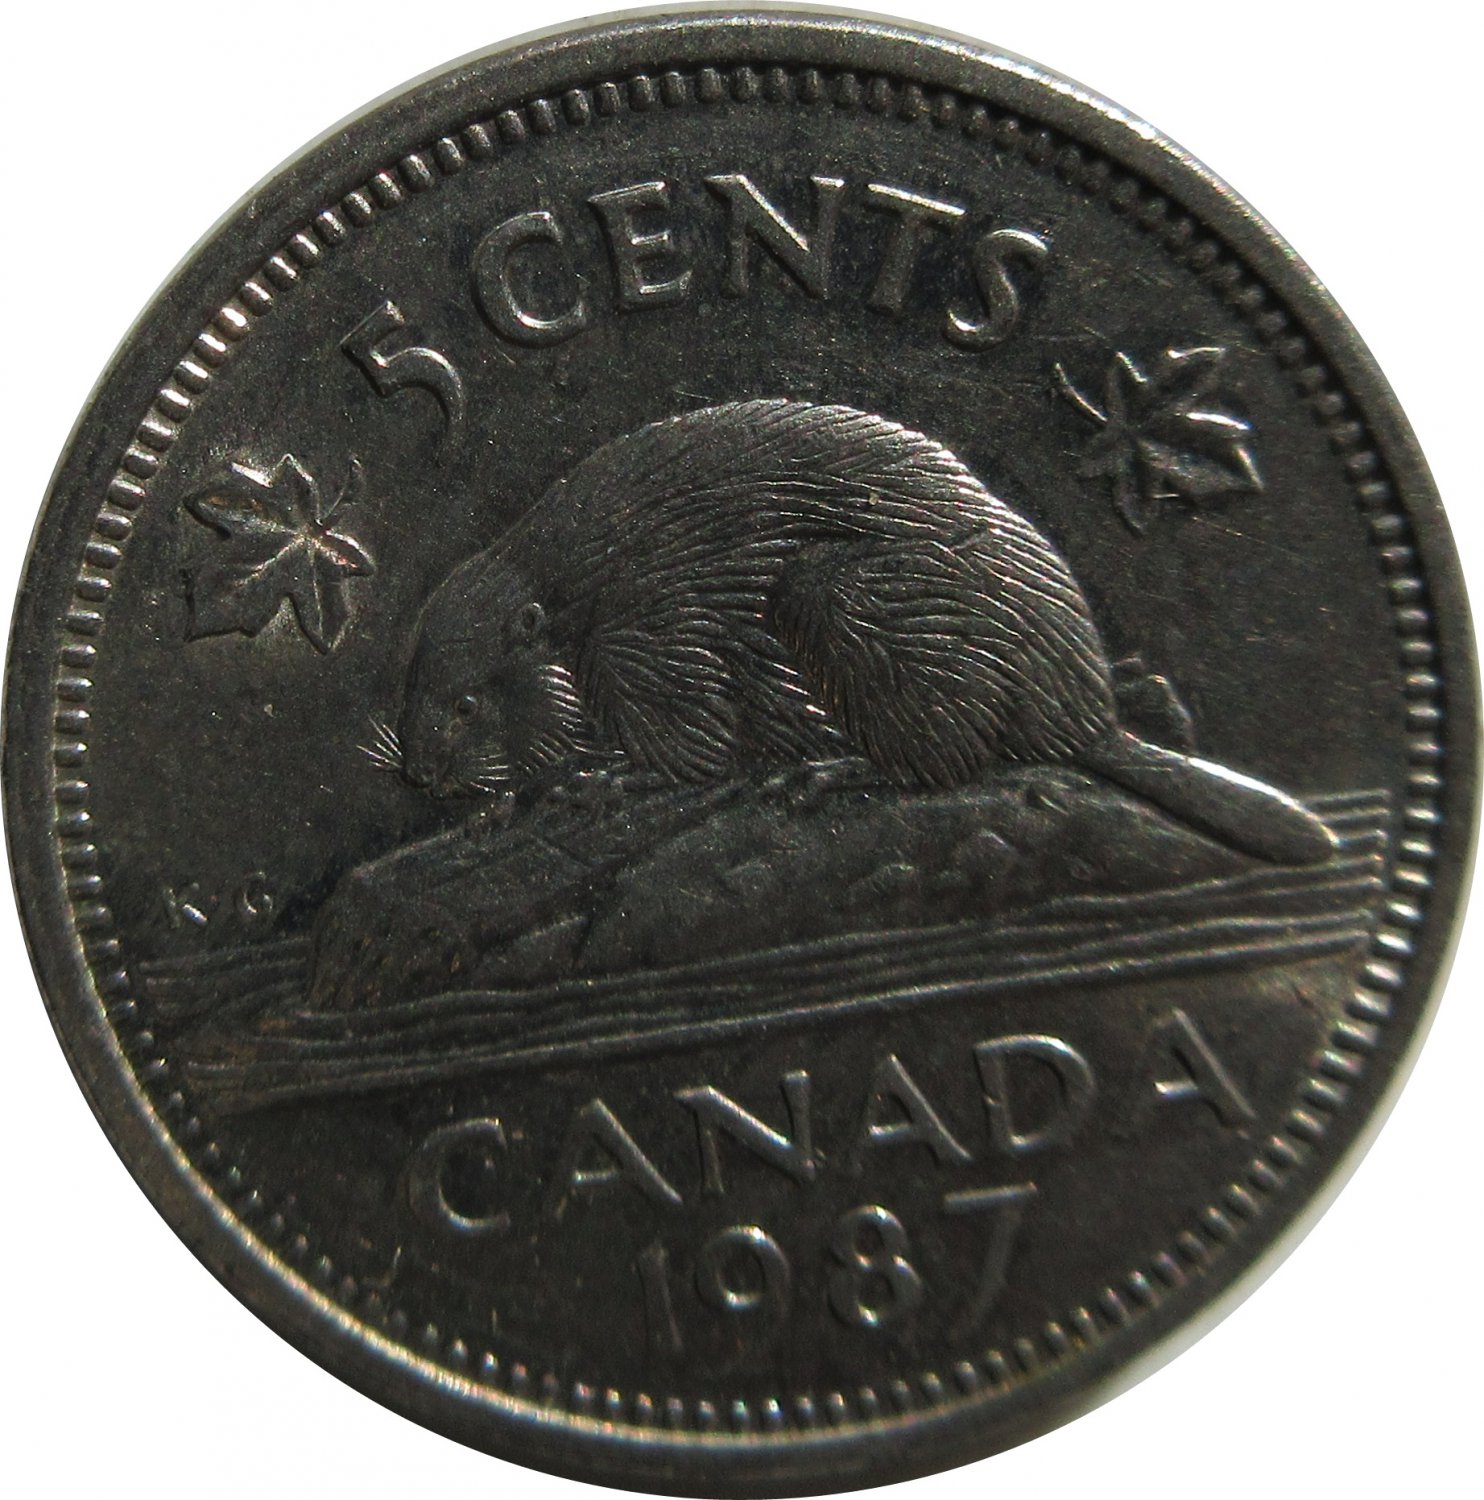 1987 Canadian 5 Cent